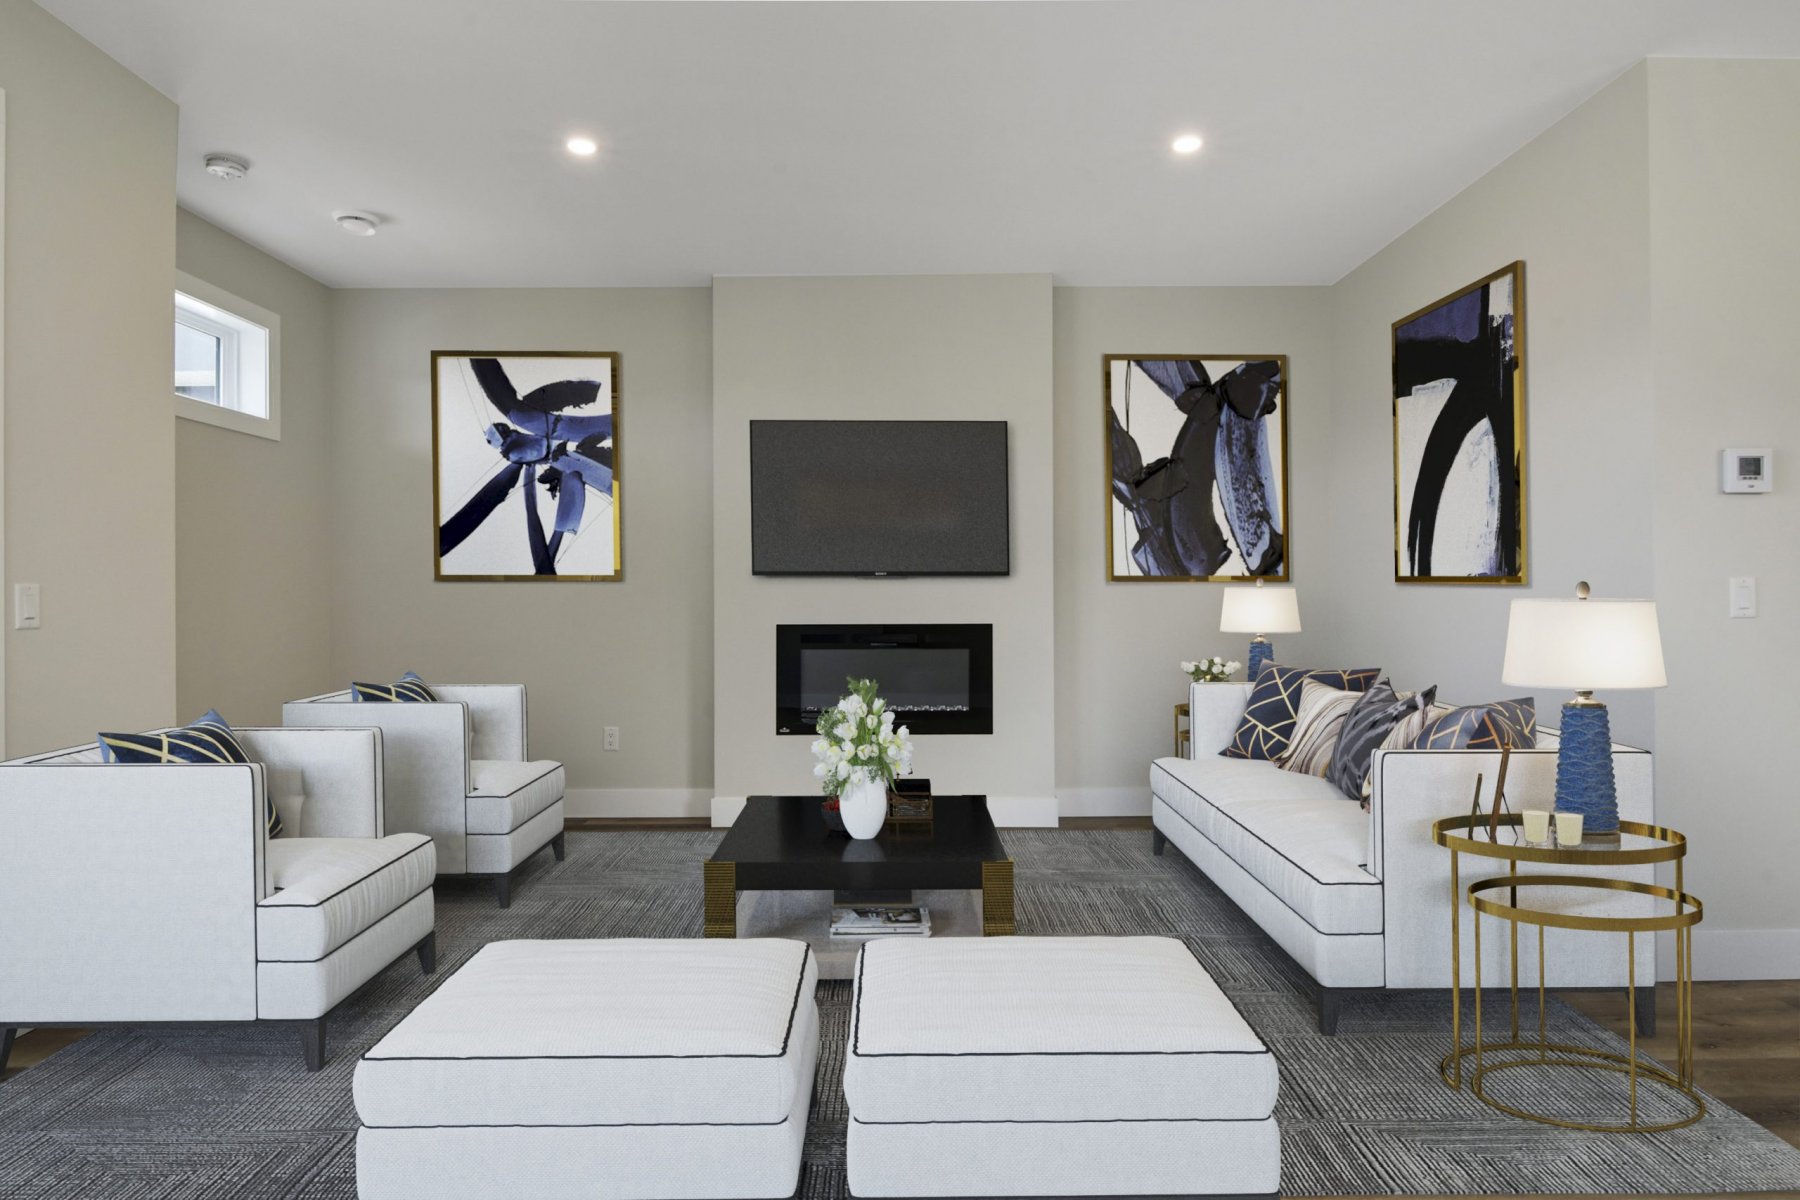 harmony_homes_the_ridge_multi_family_project_living_room_area_gallery_image_6